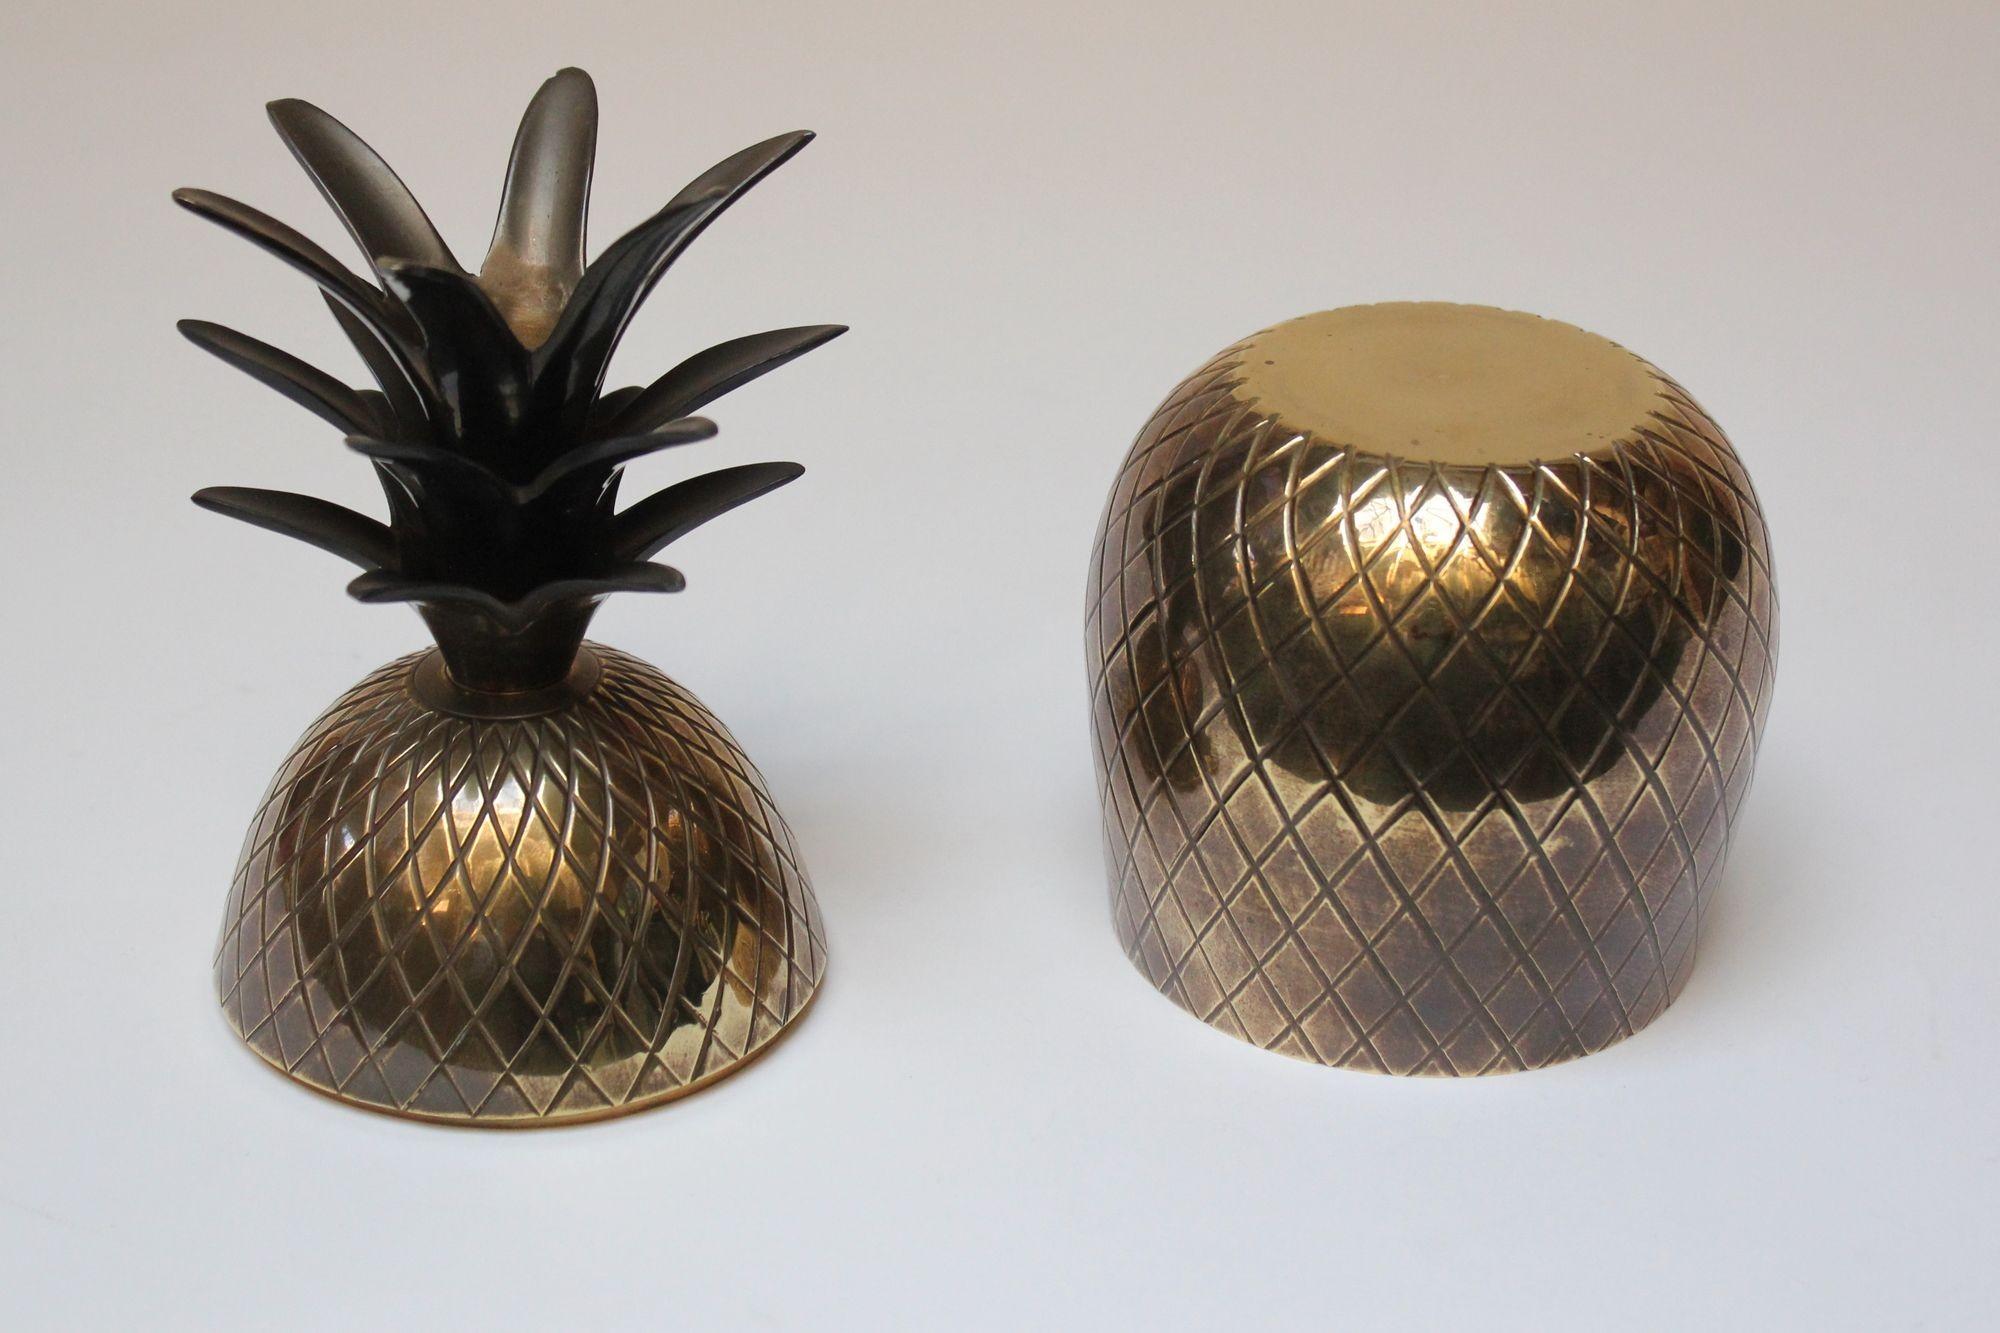 Sculptural brass pineapple-form trinket jar with natural, warm patina (circa 1970s). Sourced in Rome, Italy.
Dense, quality production, differing from flimsy, later examples of the same concept.
Good age with interior scuffs, spots of